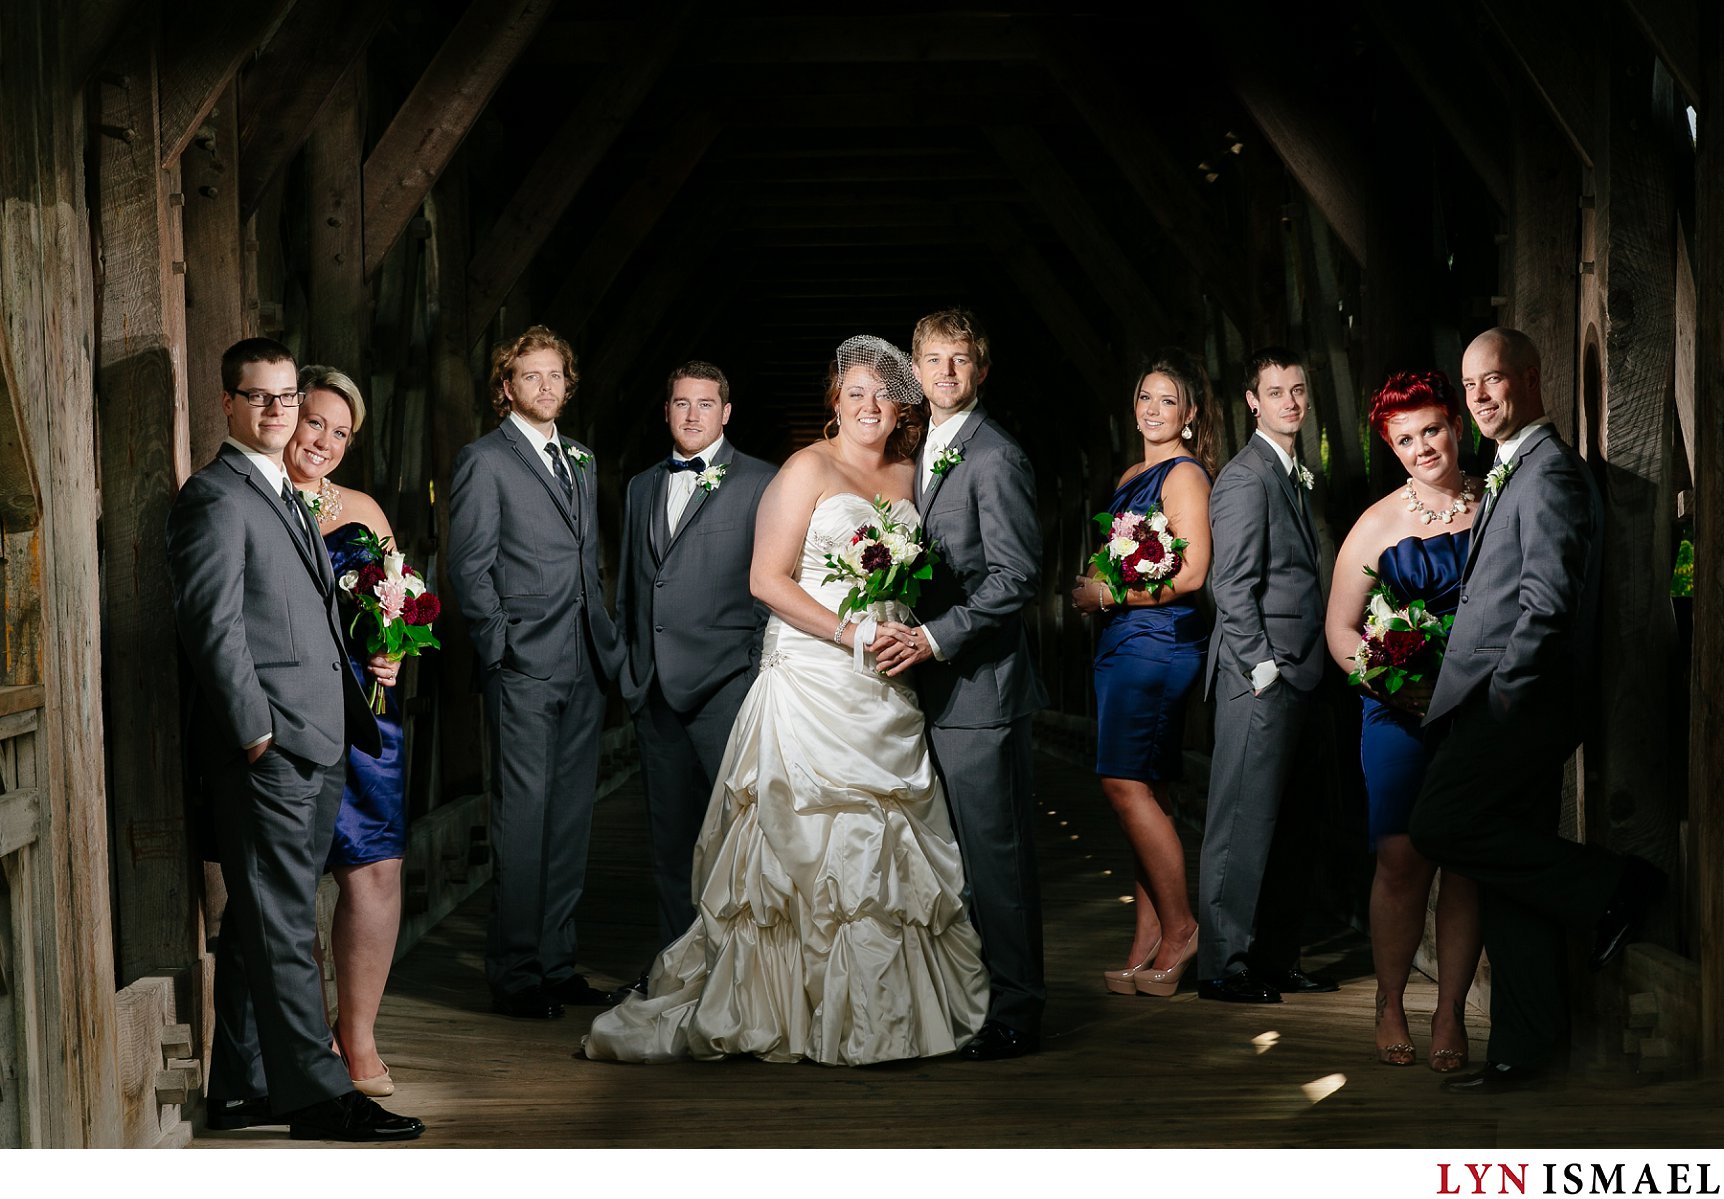 Flash composite portrait of the wedding party in Guelph, Ontario.